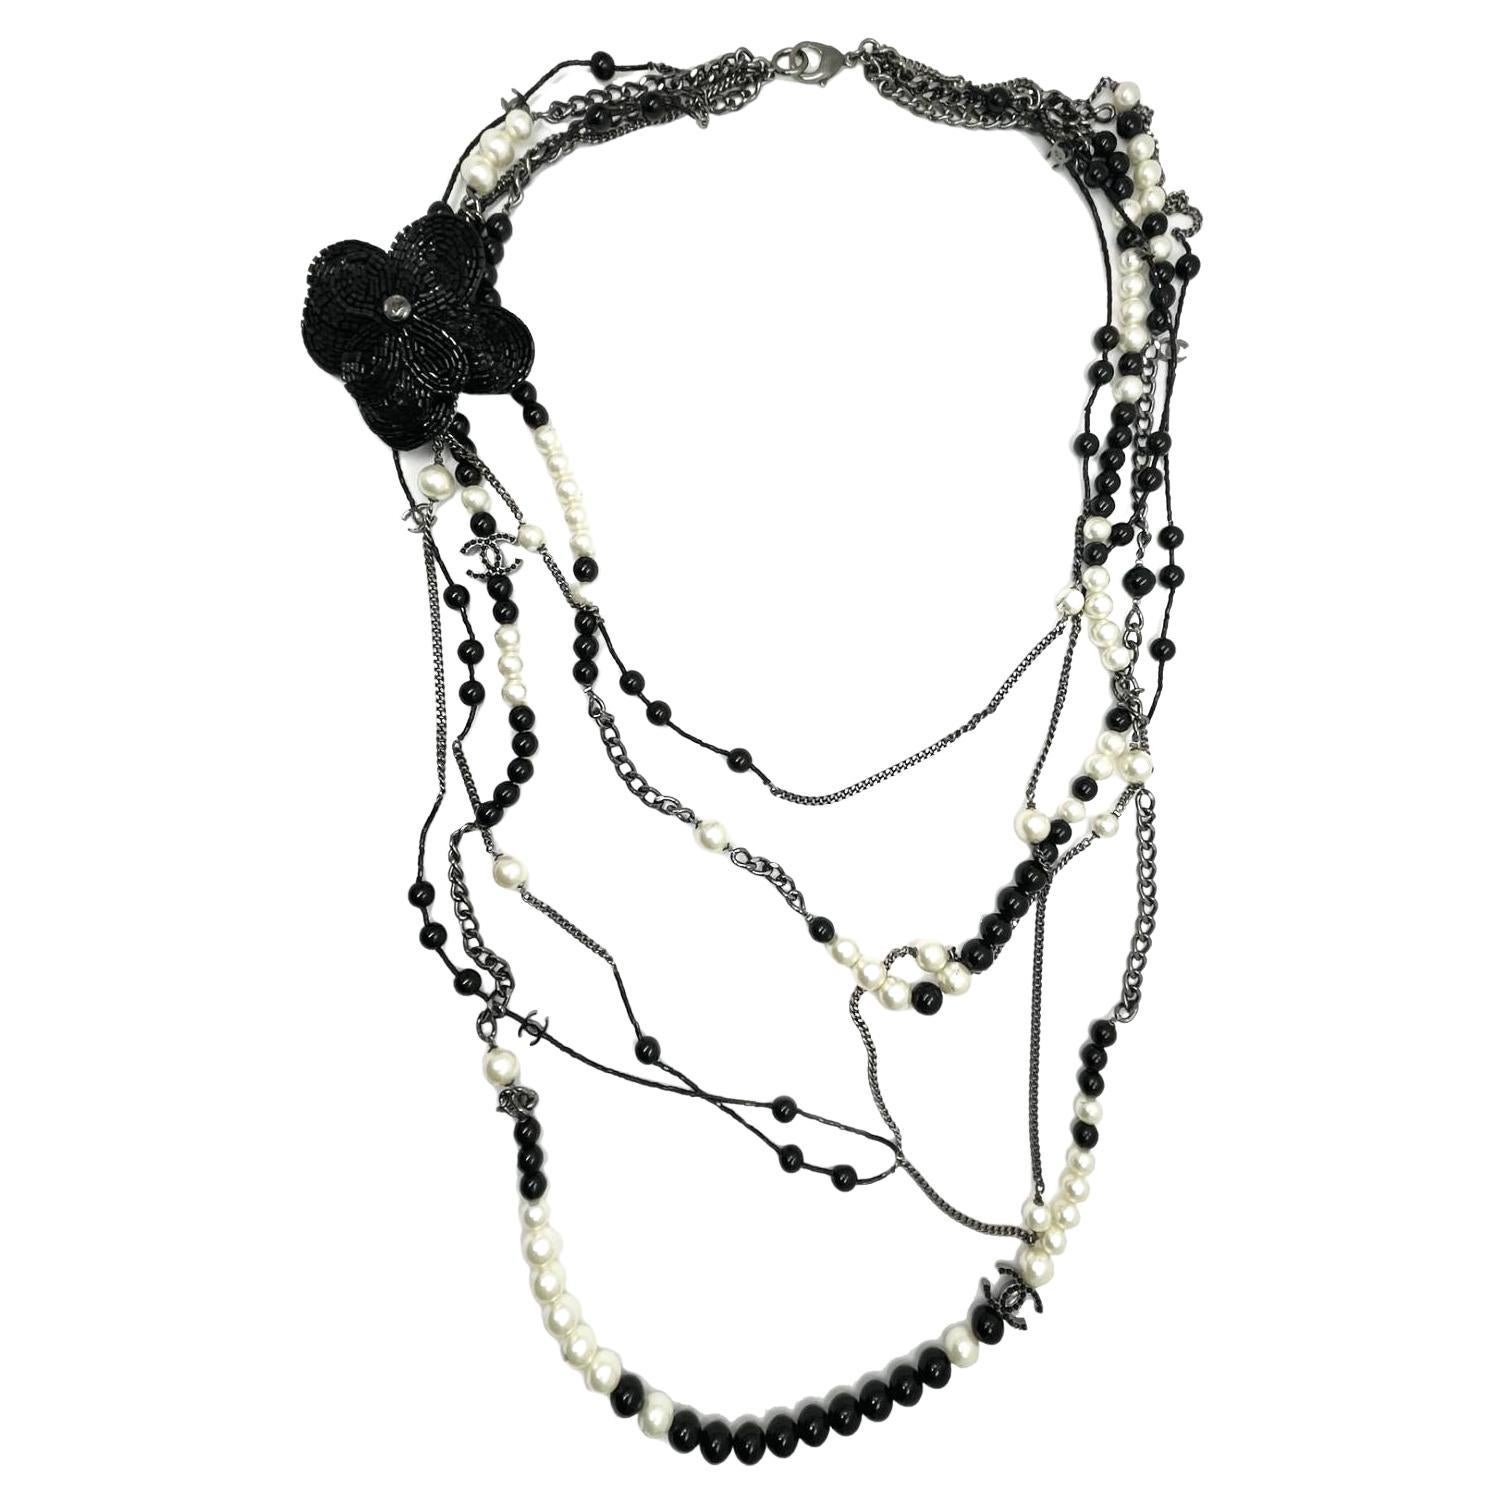 Chanel Black CC Beaded Flower Pin Black Bead Pearl 5 Strand Necklace